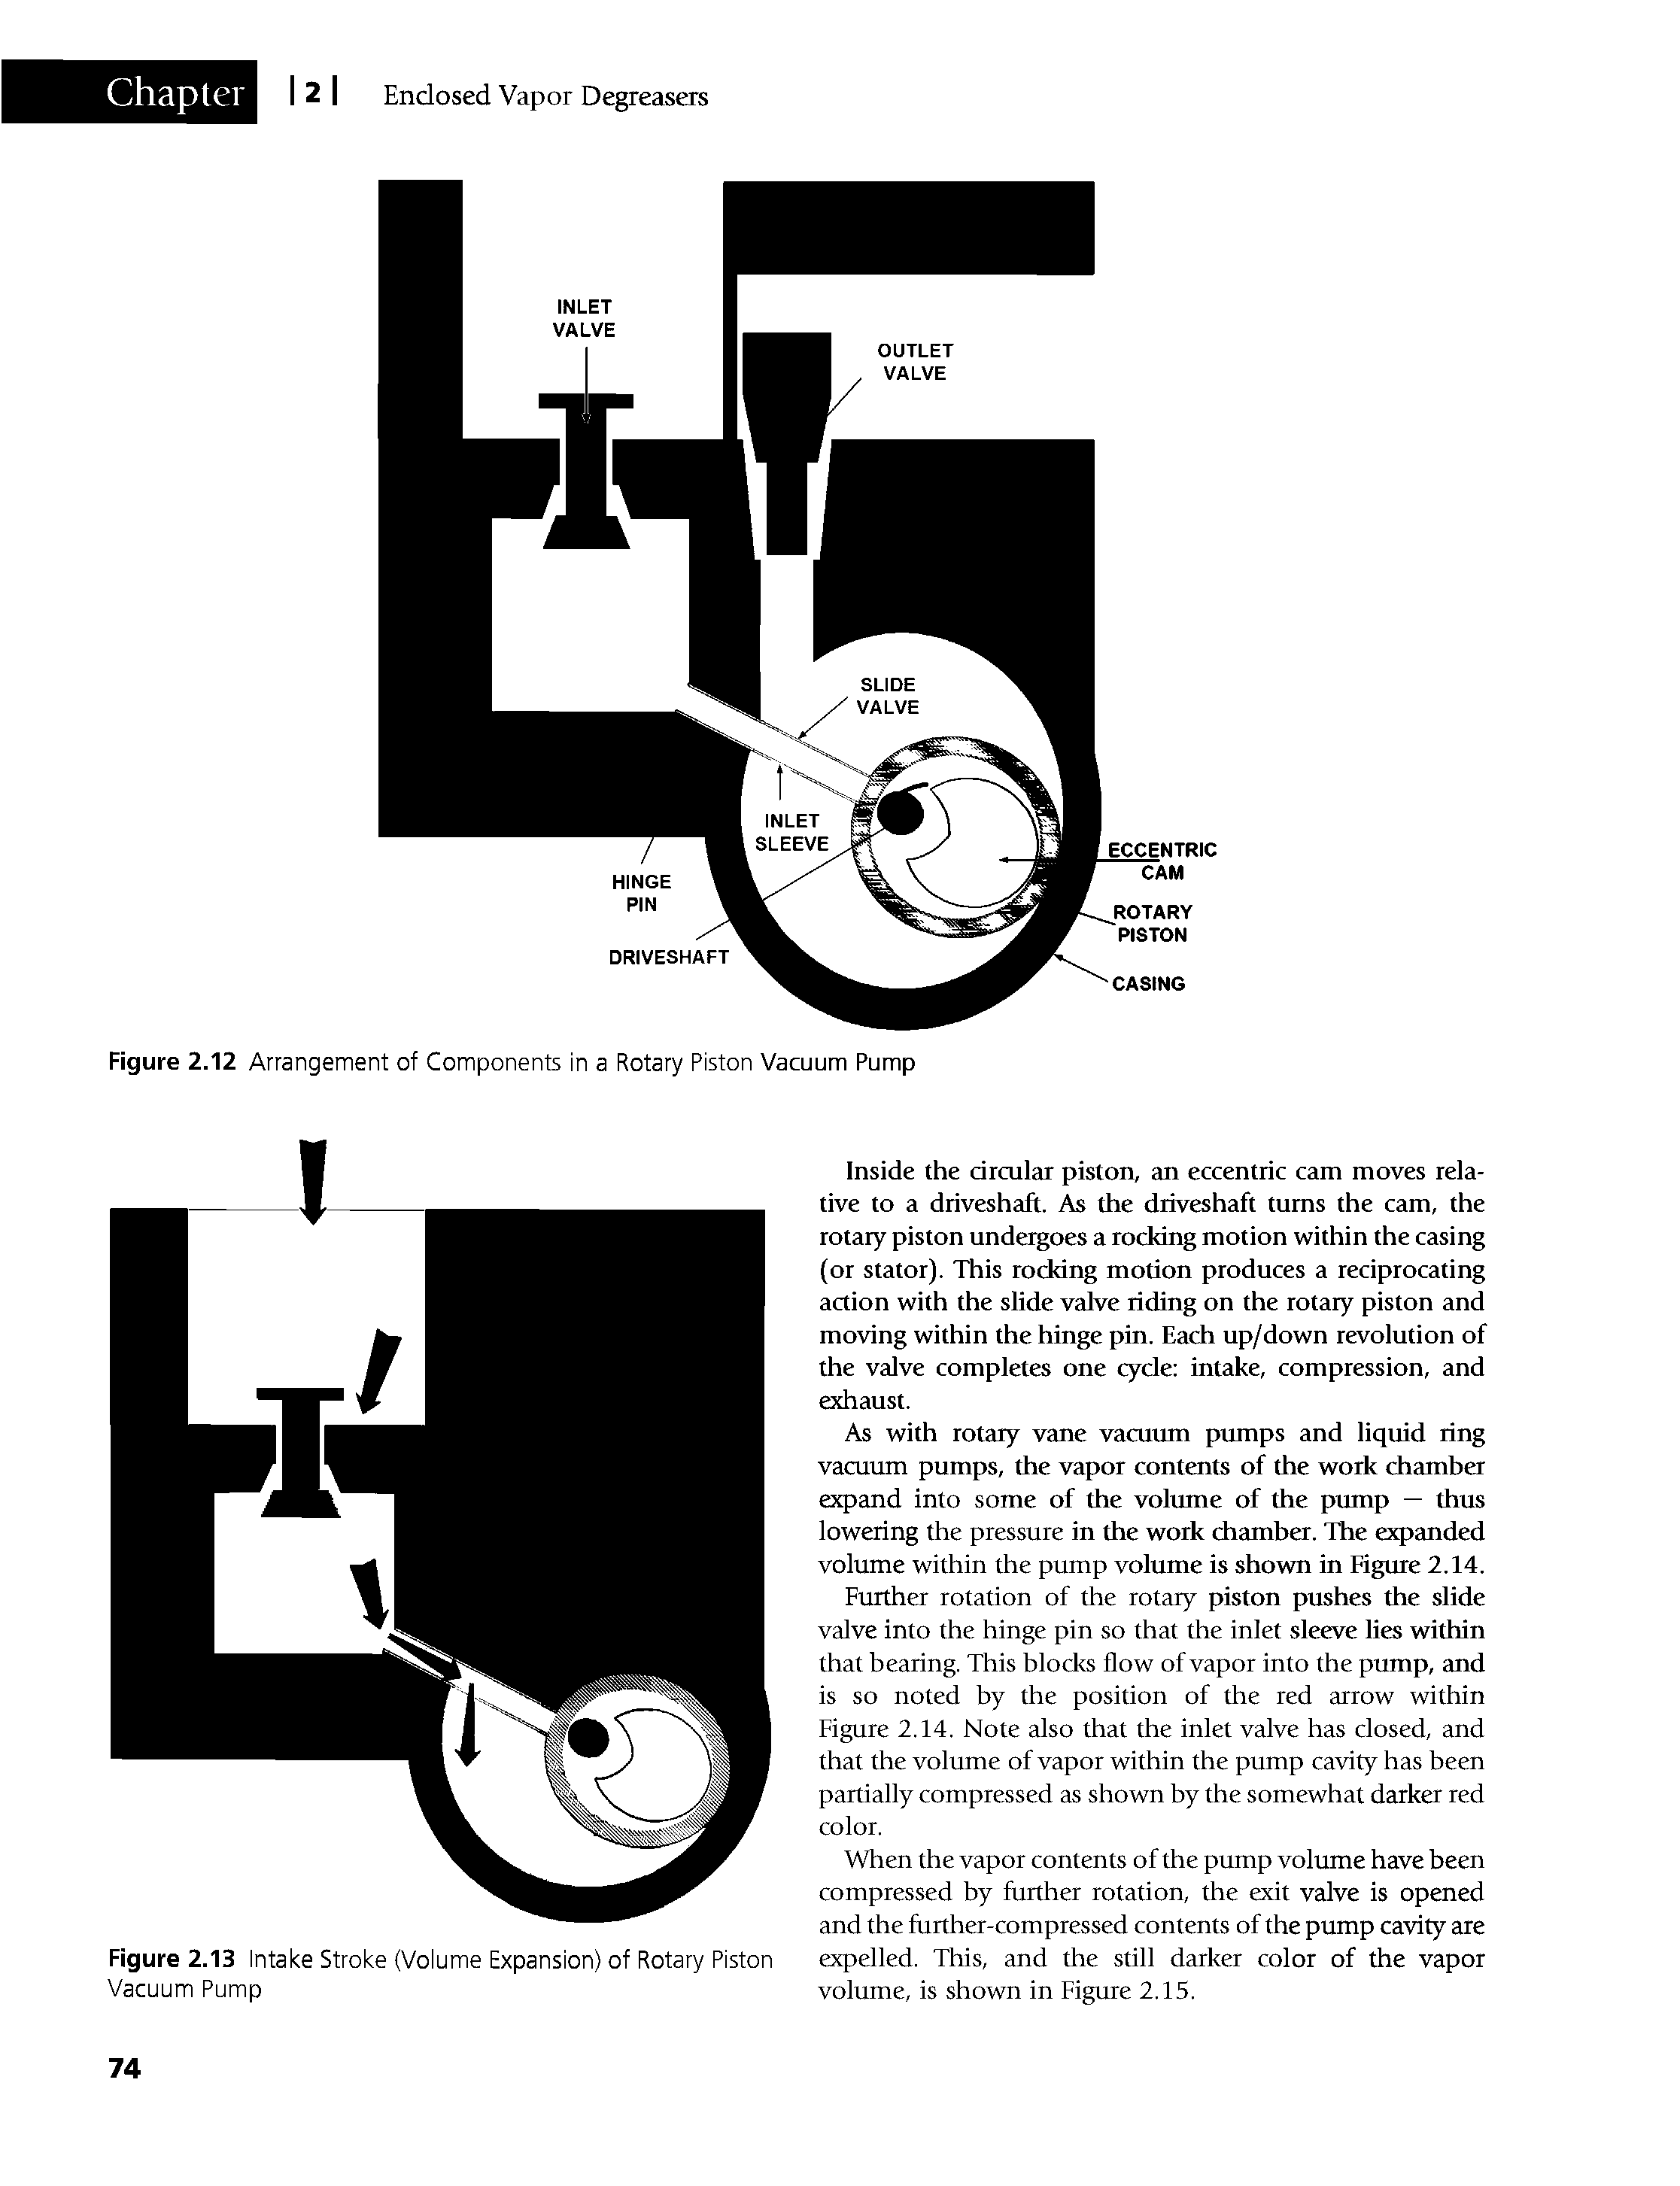 Figure 2.12 Arrangement of Components in a Rotary Piston Vacuum Pump...